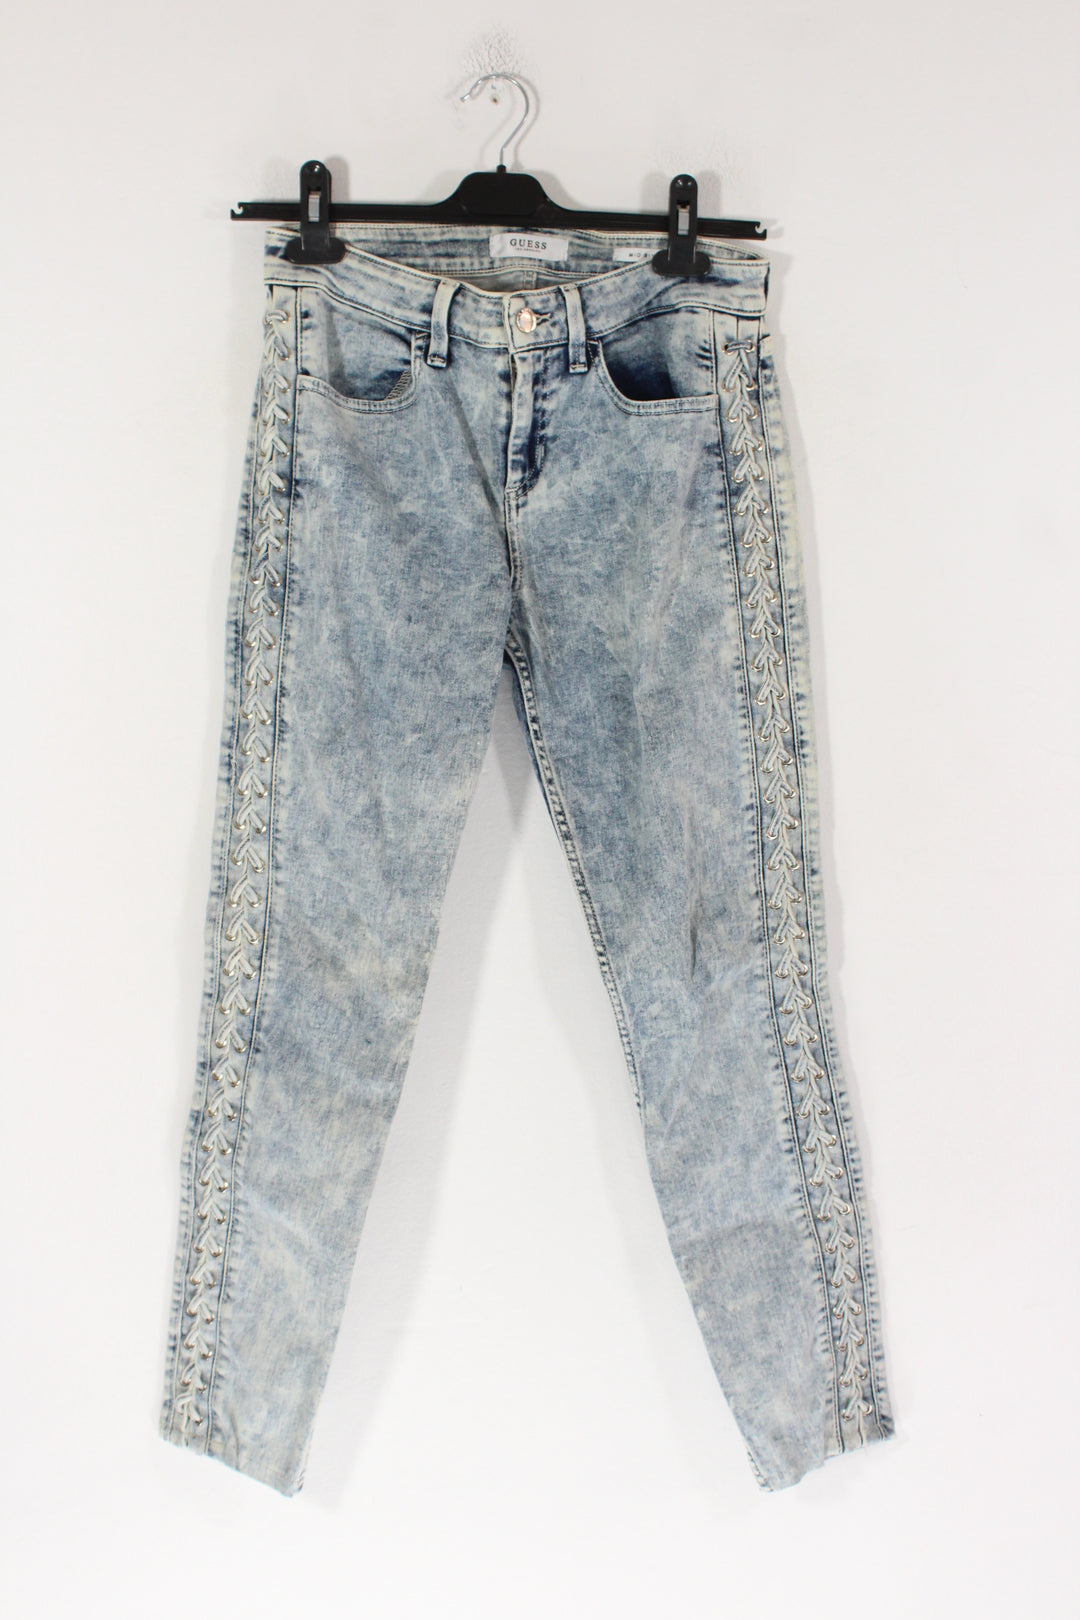 GUESS Mid Waisted Skinny Jeans Women's Small(32/34)